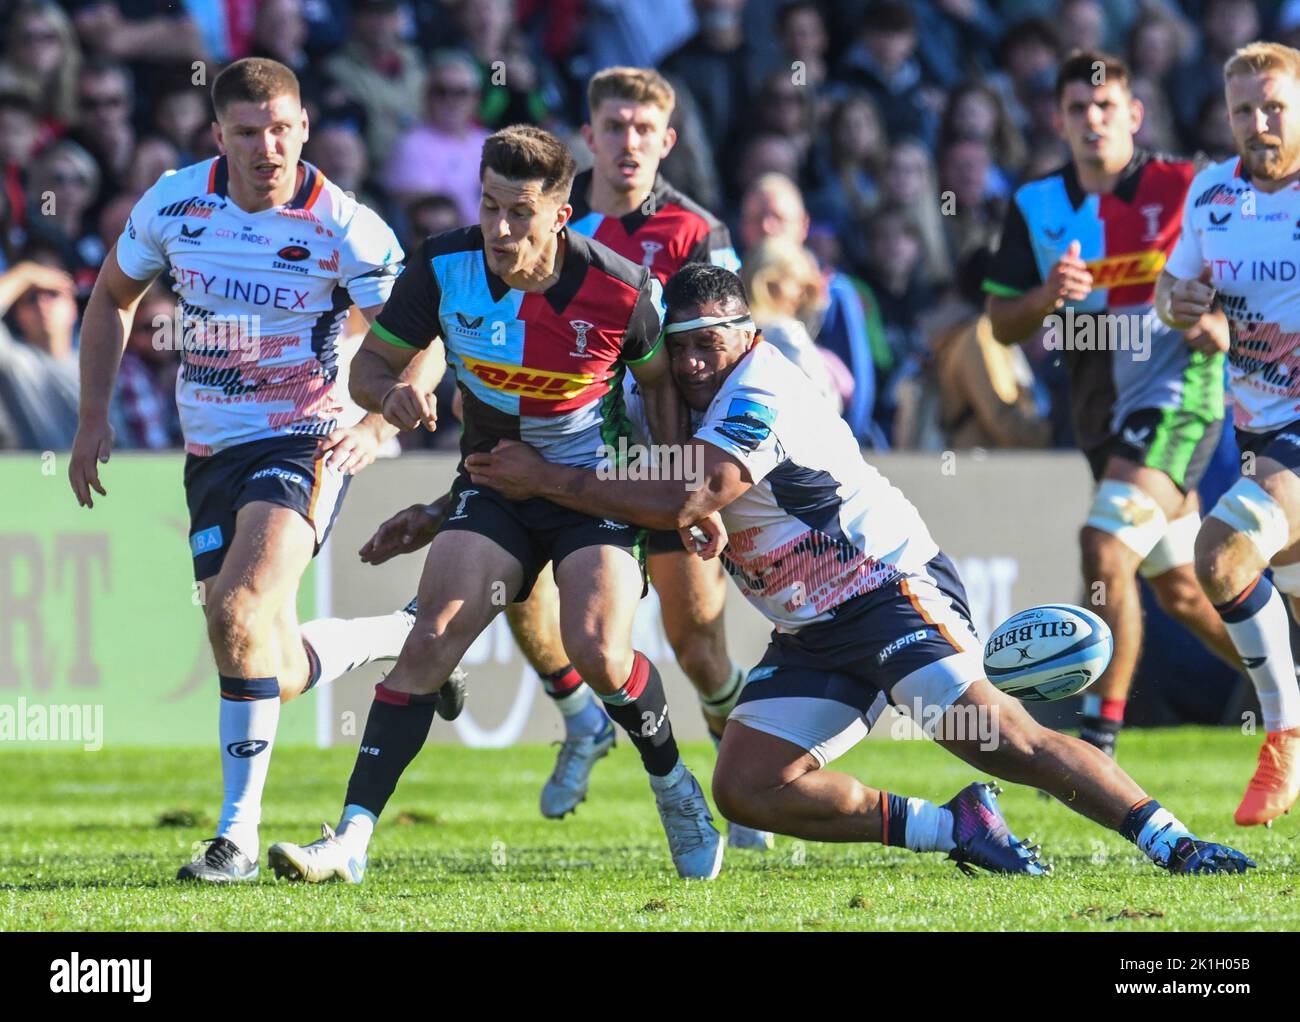 Tommy Allan of Harlequins in action during the Gallagher Premiership Rugby match between Harlequins and Saracens at Twickenham Stoop Stadium on Septem Stock Photo